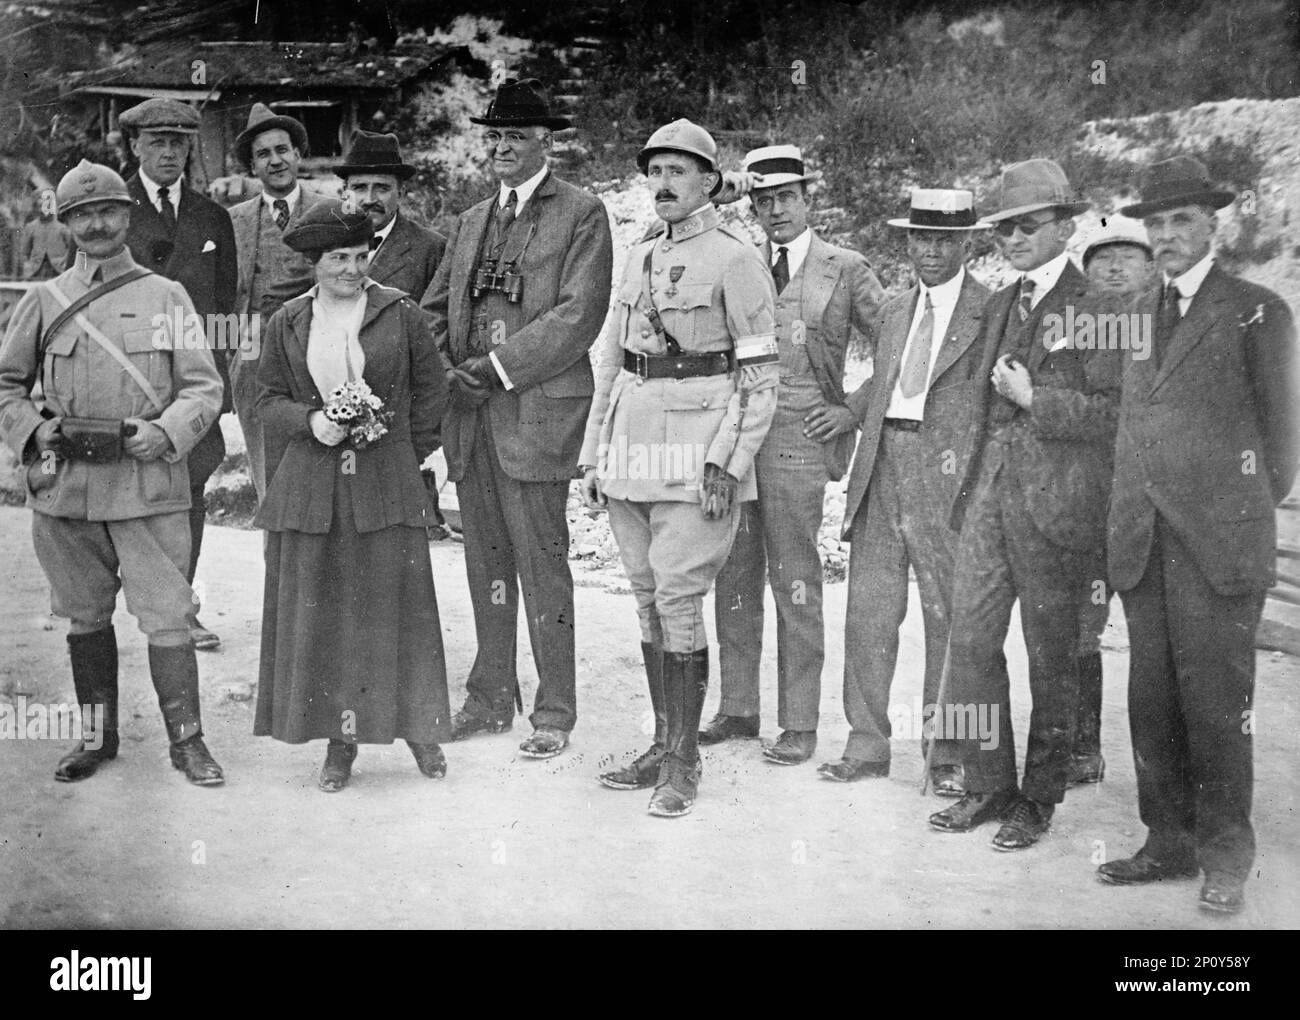 Rheims, France - American War Correspondents: French Officer; Mrs. Harriet C. Adams; Paul Cravath; Capt. Paul Dumas, Wearing Artificial Hand And arm; Unidentified; Charles Edward Russell; Unidentified; Judge Robert Grant, 1916. American explorer, writer and photographer Harriet Chalmers Adamss was a correspondent for Harper's Magazine in Europe during World War I. She was the only female journalist permitted to visit the trenches. Lawyer Paul Drennan Cravath demanded American intervention in the war against Germany. Charles Edward Russell was a journalist, opinion columnist, newspaper editor, Stock Photo